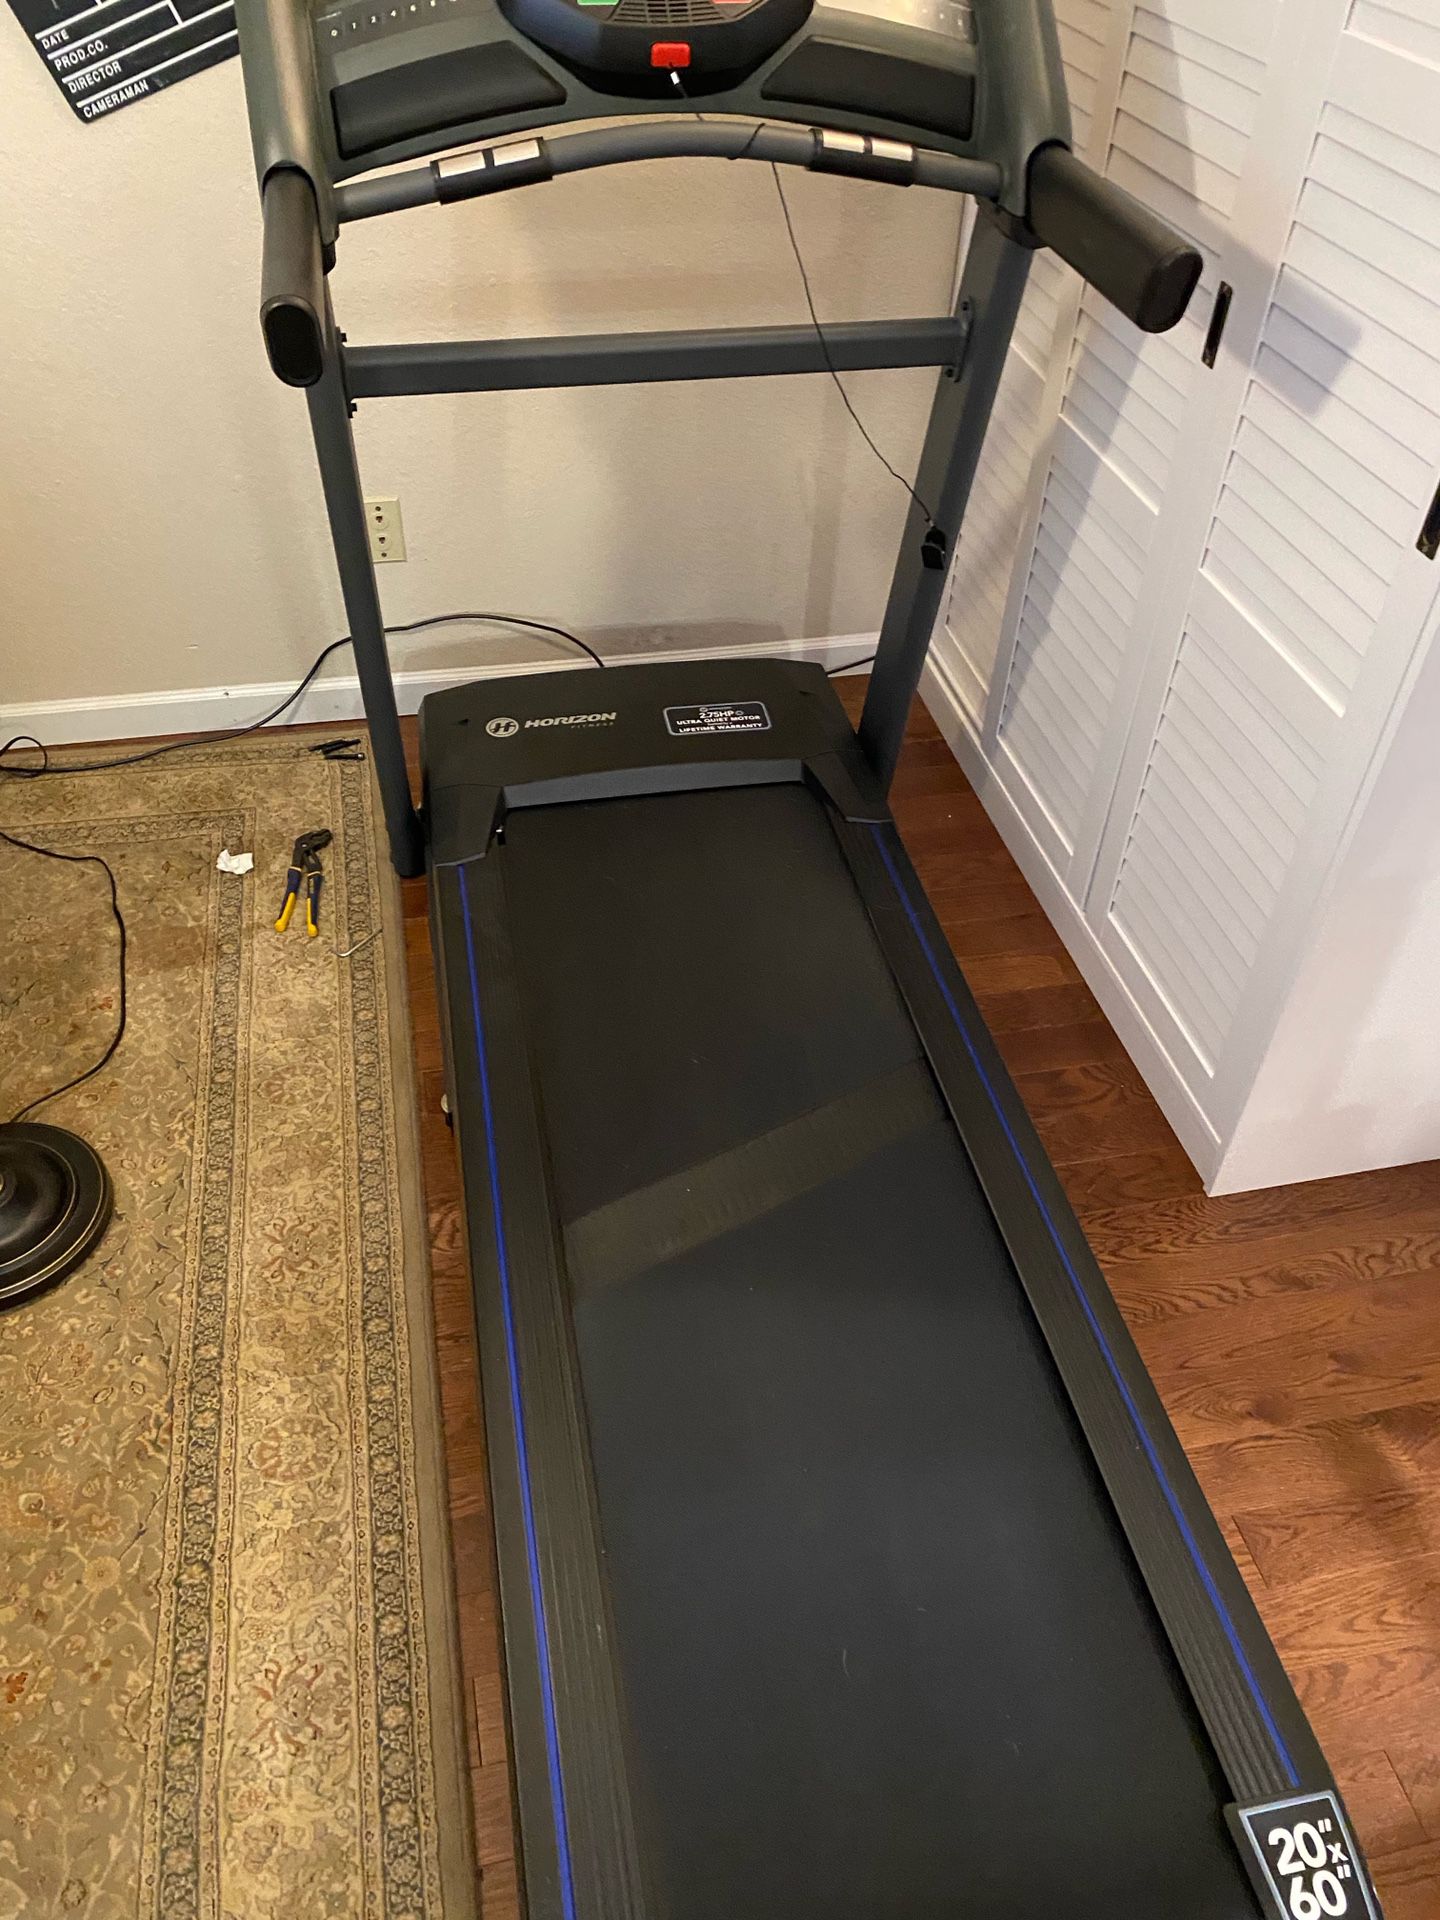 New Horizon T202 treadmill, used only three times